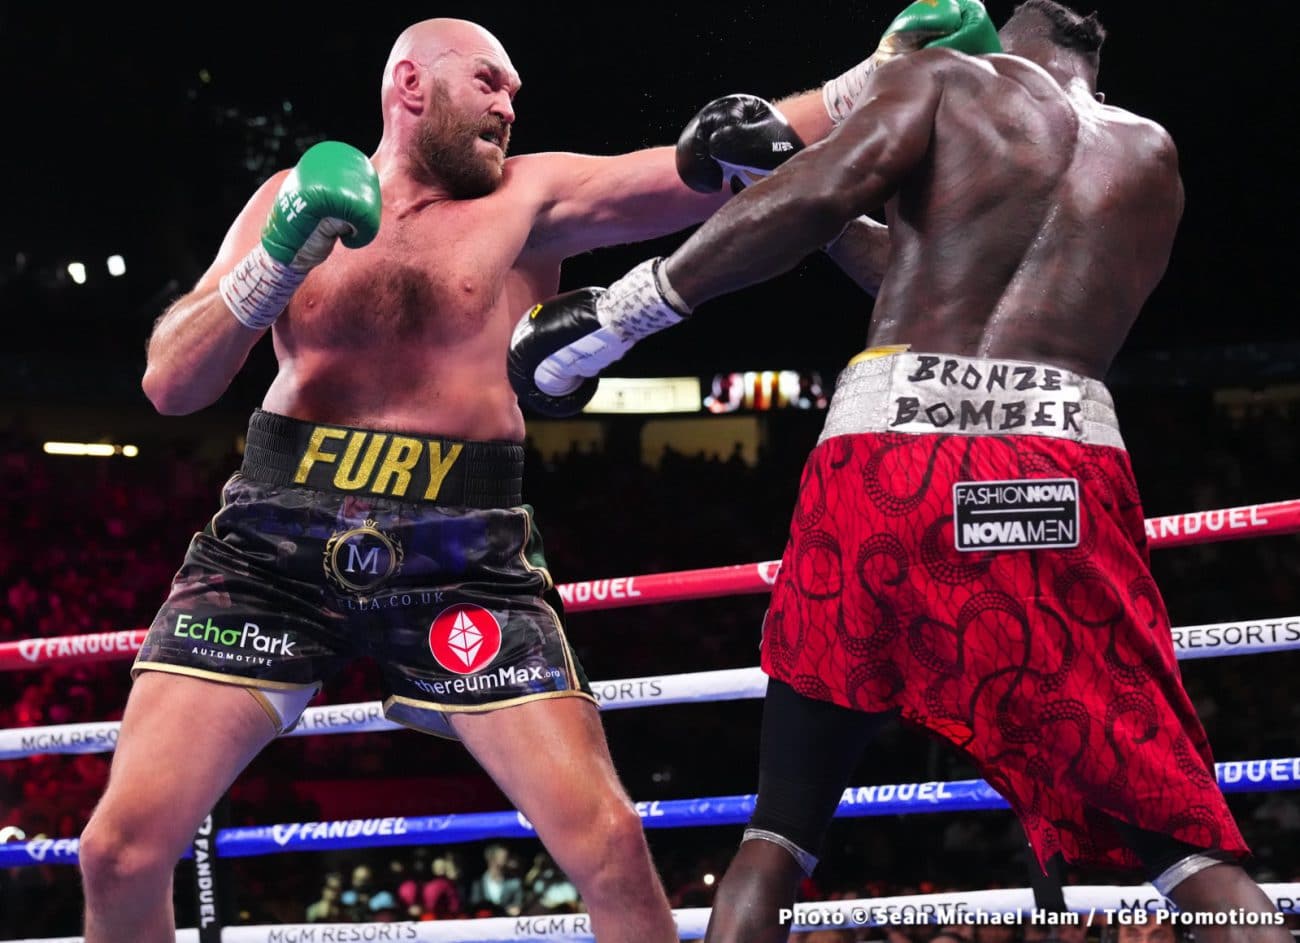 Tyson Fury, Mike Tyson boxing photo and news image